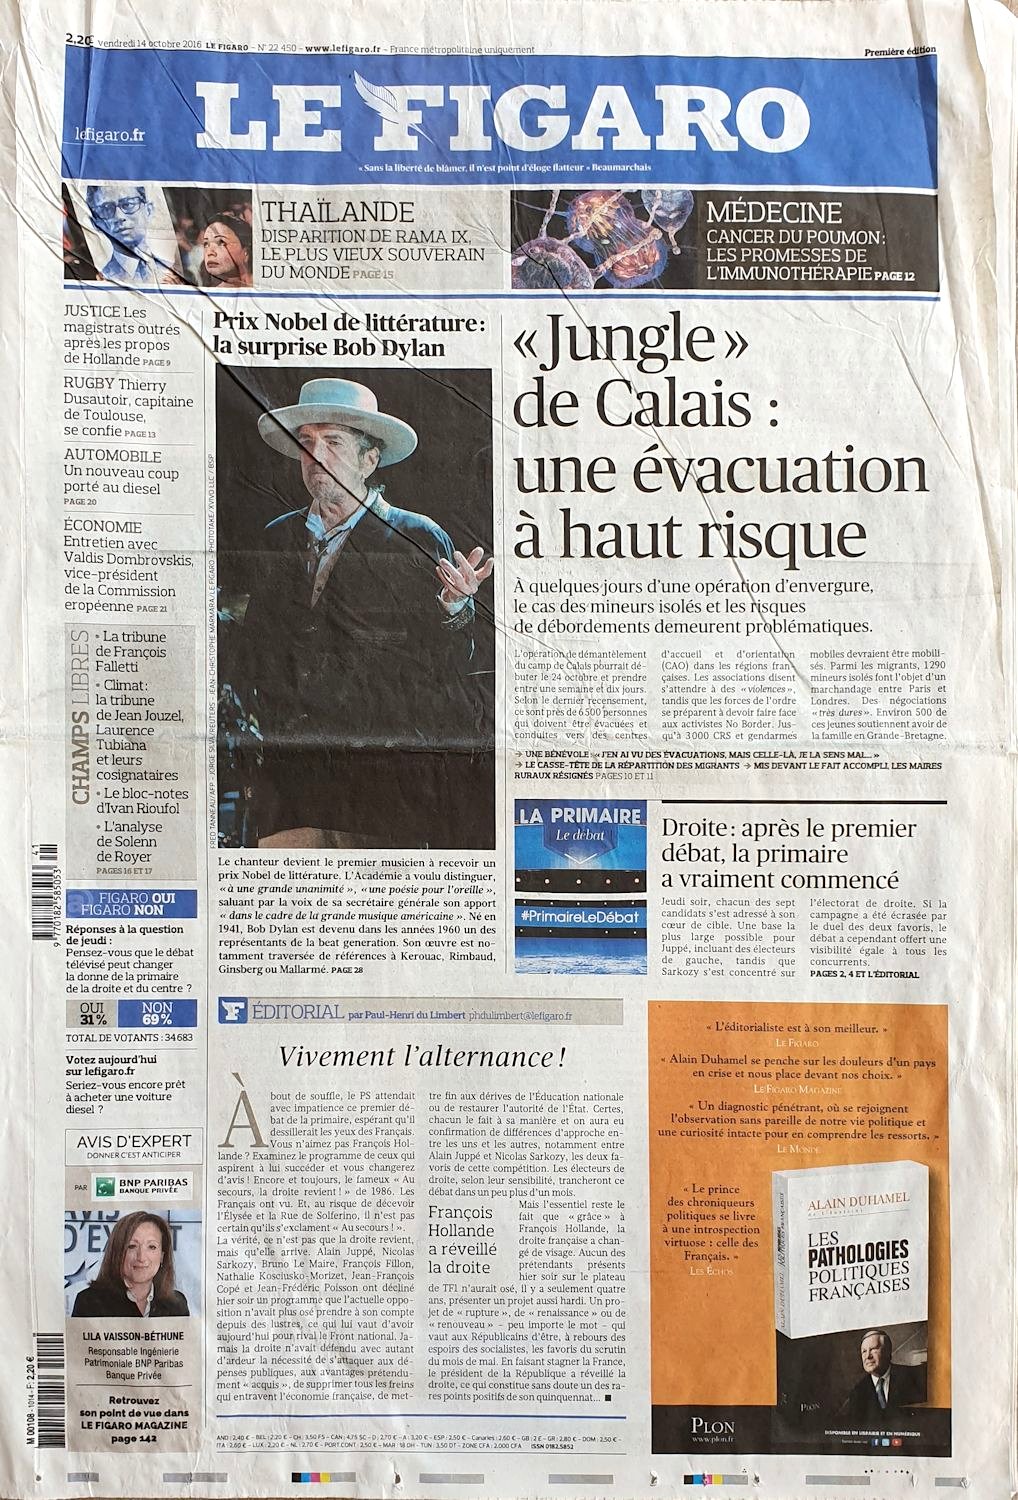 le figaro 14 oct 2016 Bob Dylan front cover